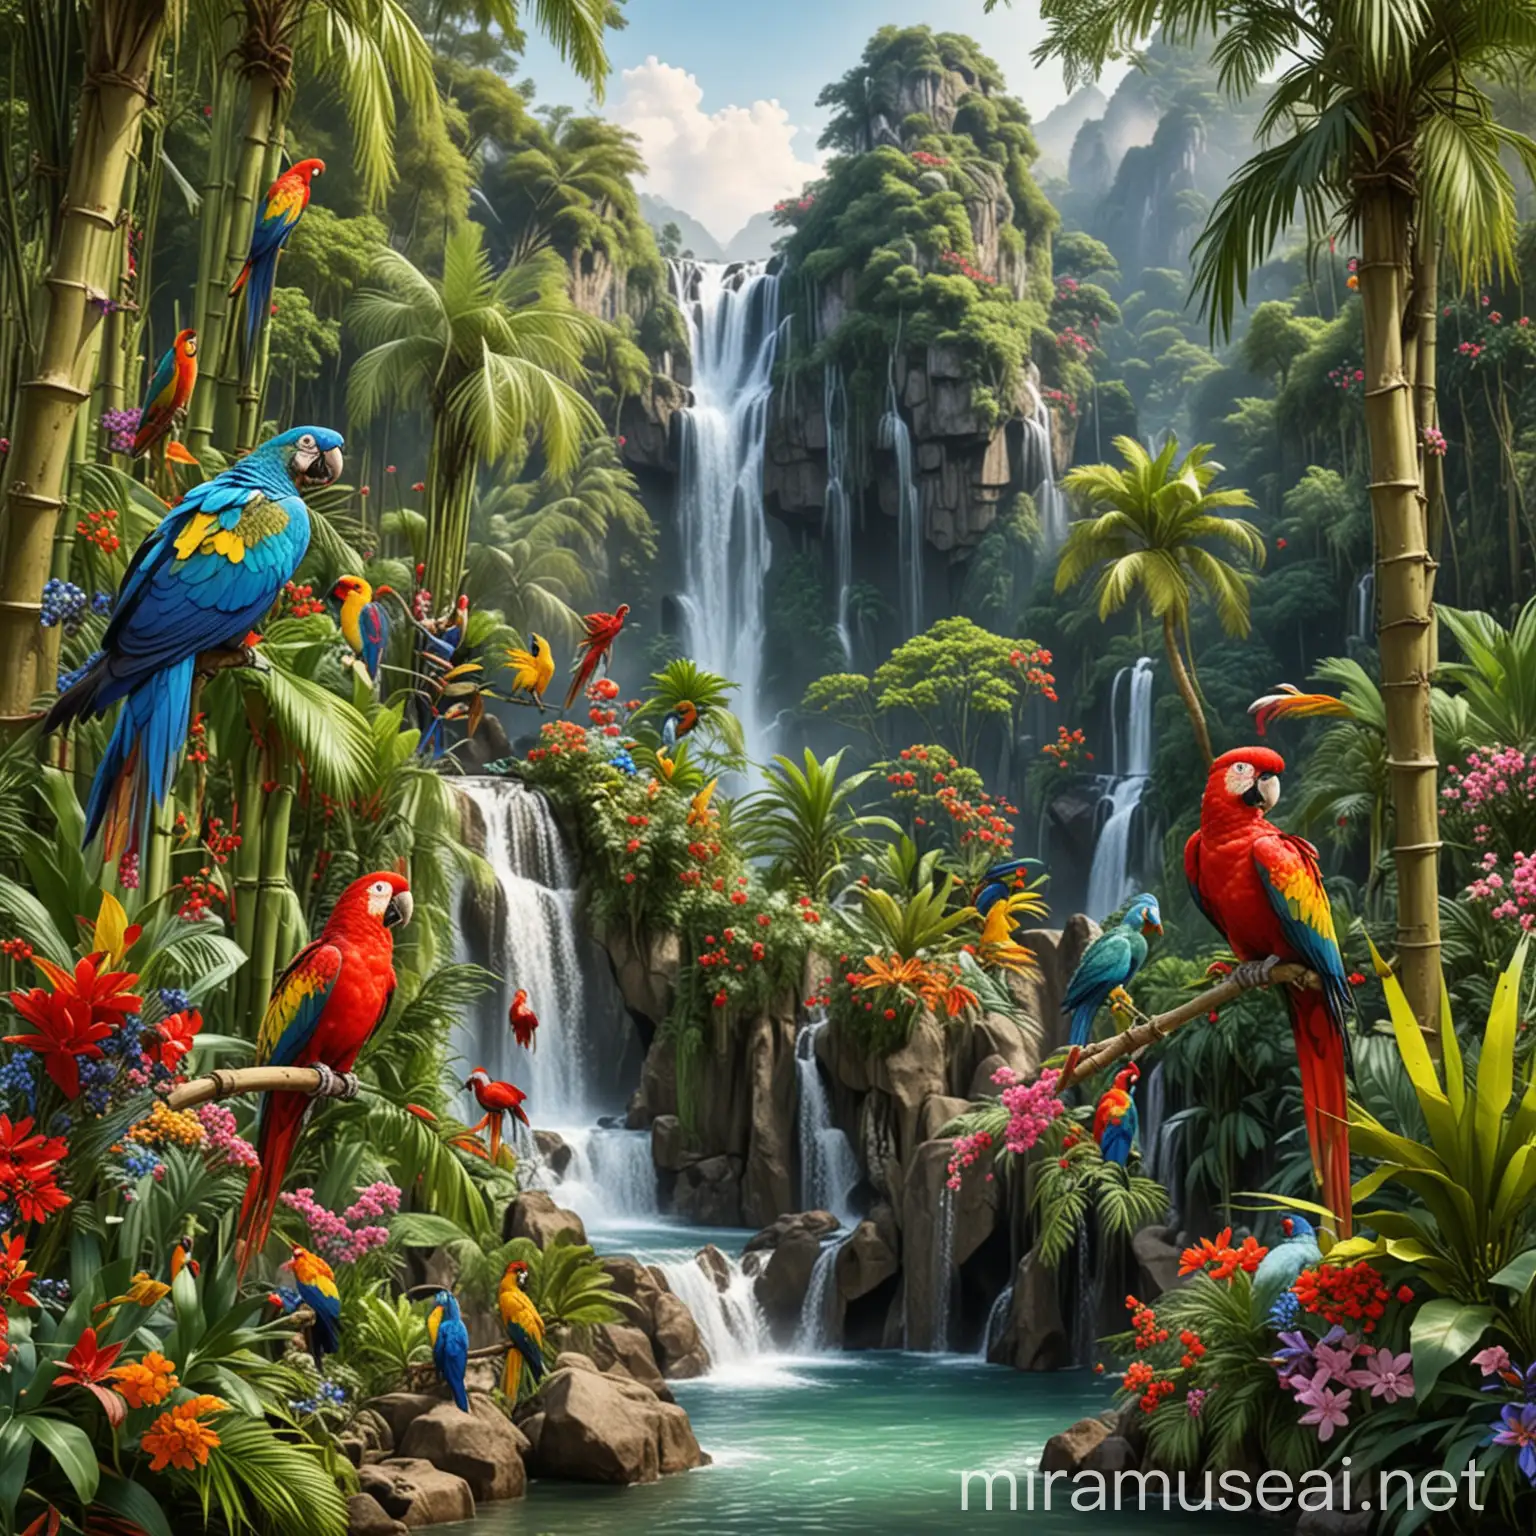 Tropical Island with Bamboo Forest Waterfall and Exotic Birds